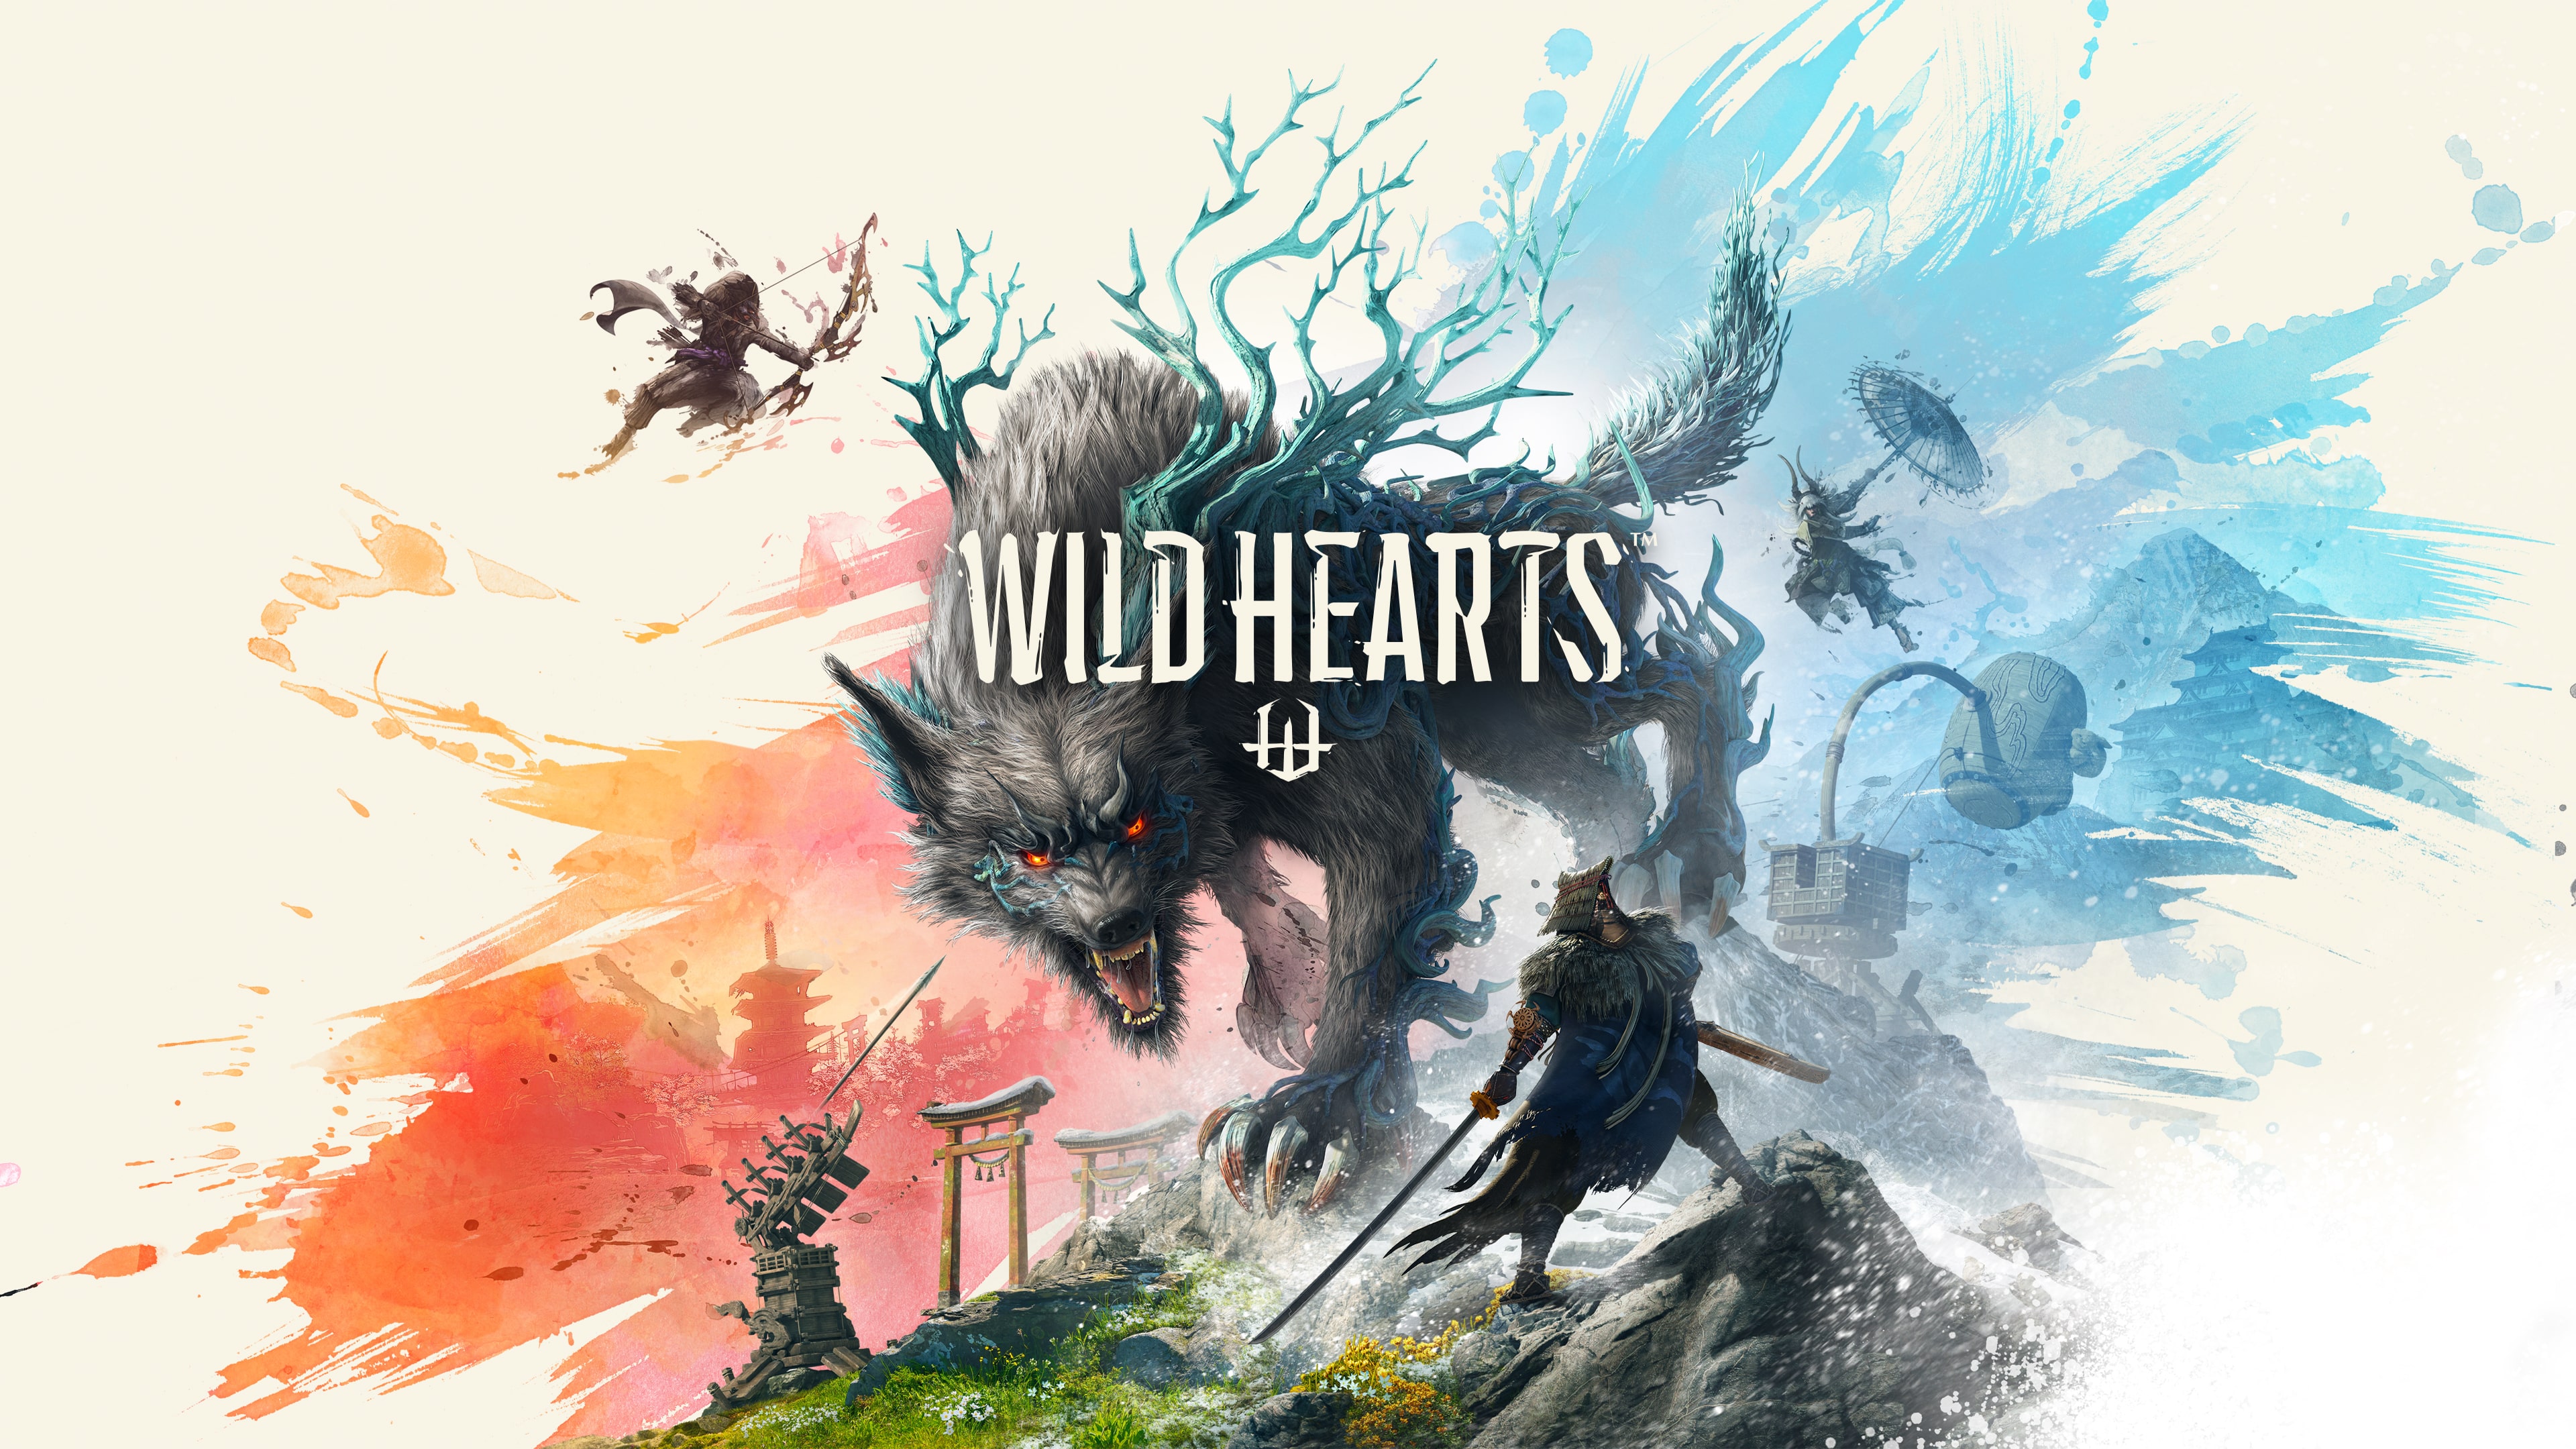 WILD HEARTS™ Standard Edition (Simplified Chinese, English, Korean, Japanese, Traditional Chinese)